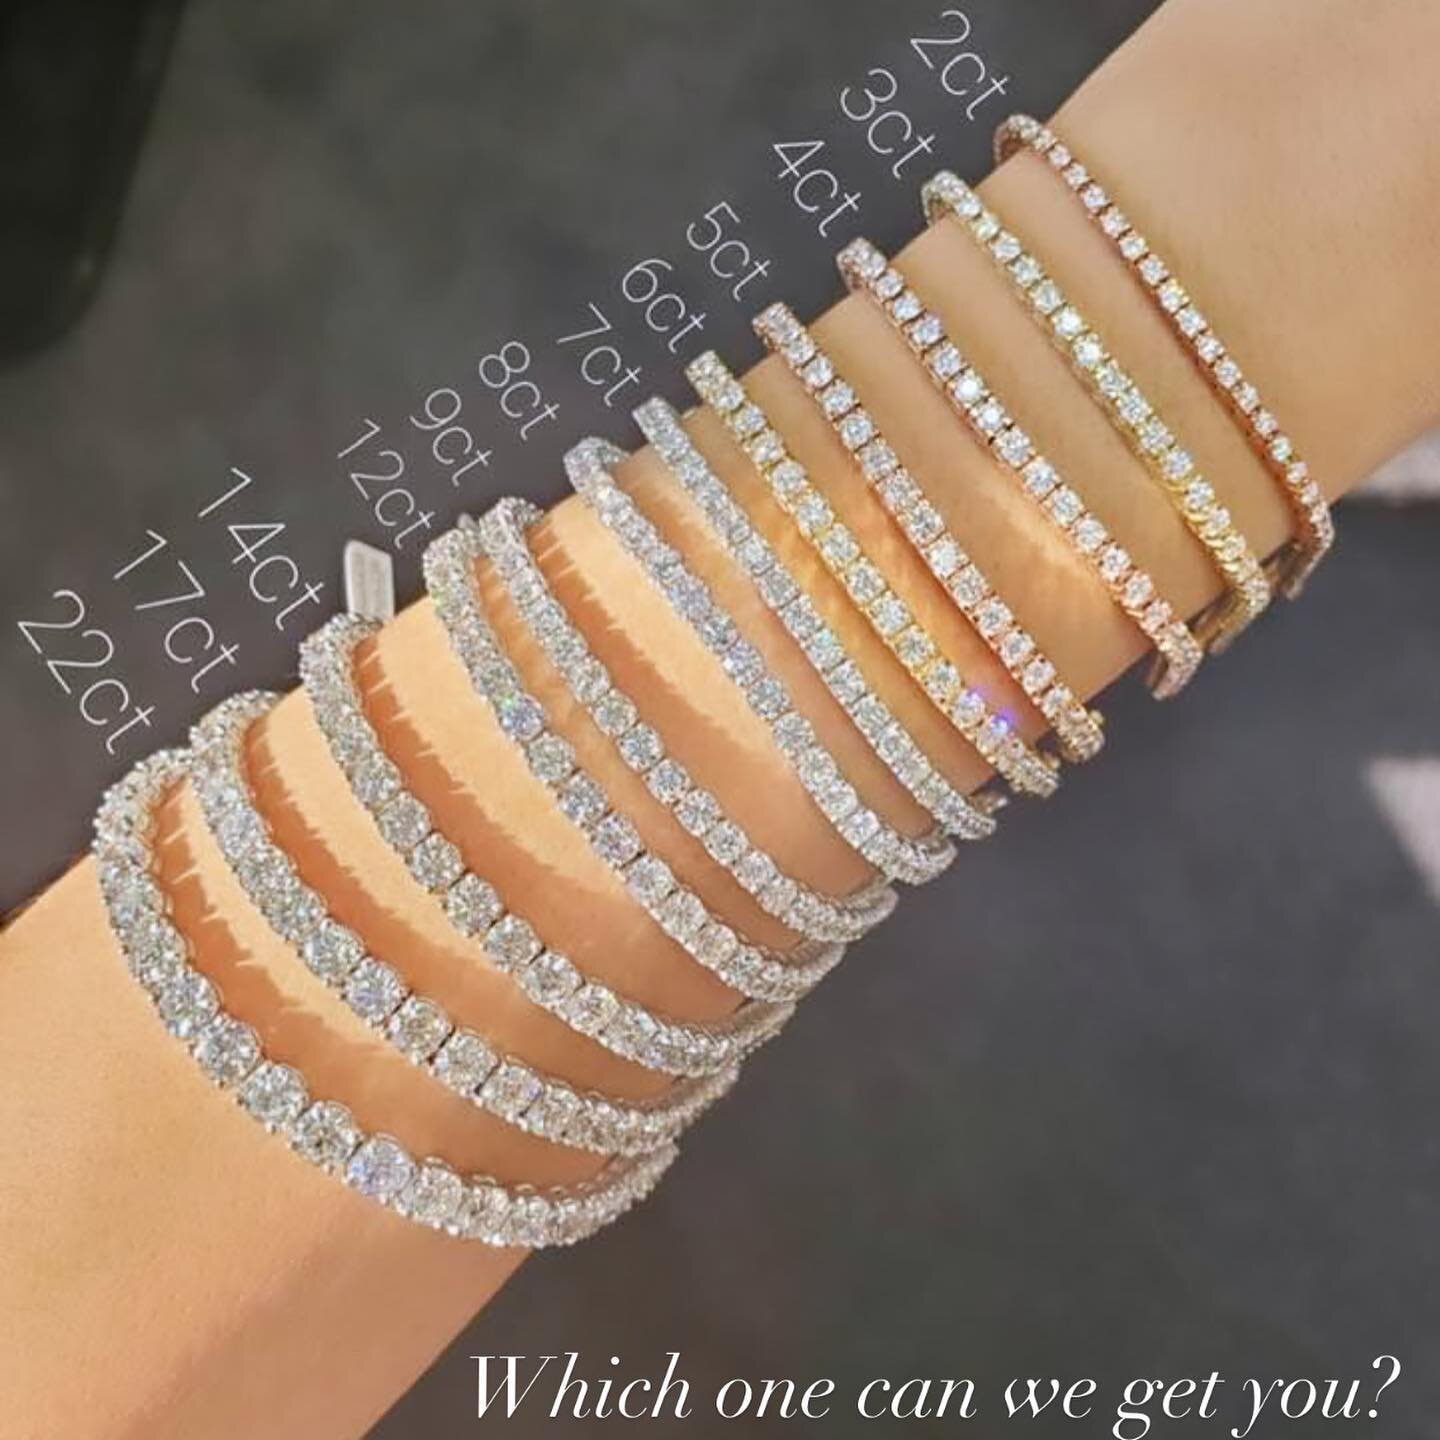 Which one is for you? 🎁

Diamond Tennis Bracelets in all sizes, cut and carat weight. Yellow, white or rose gold options 🥂 DM for pricing 💫

#wavediamonds #wavediamondsla